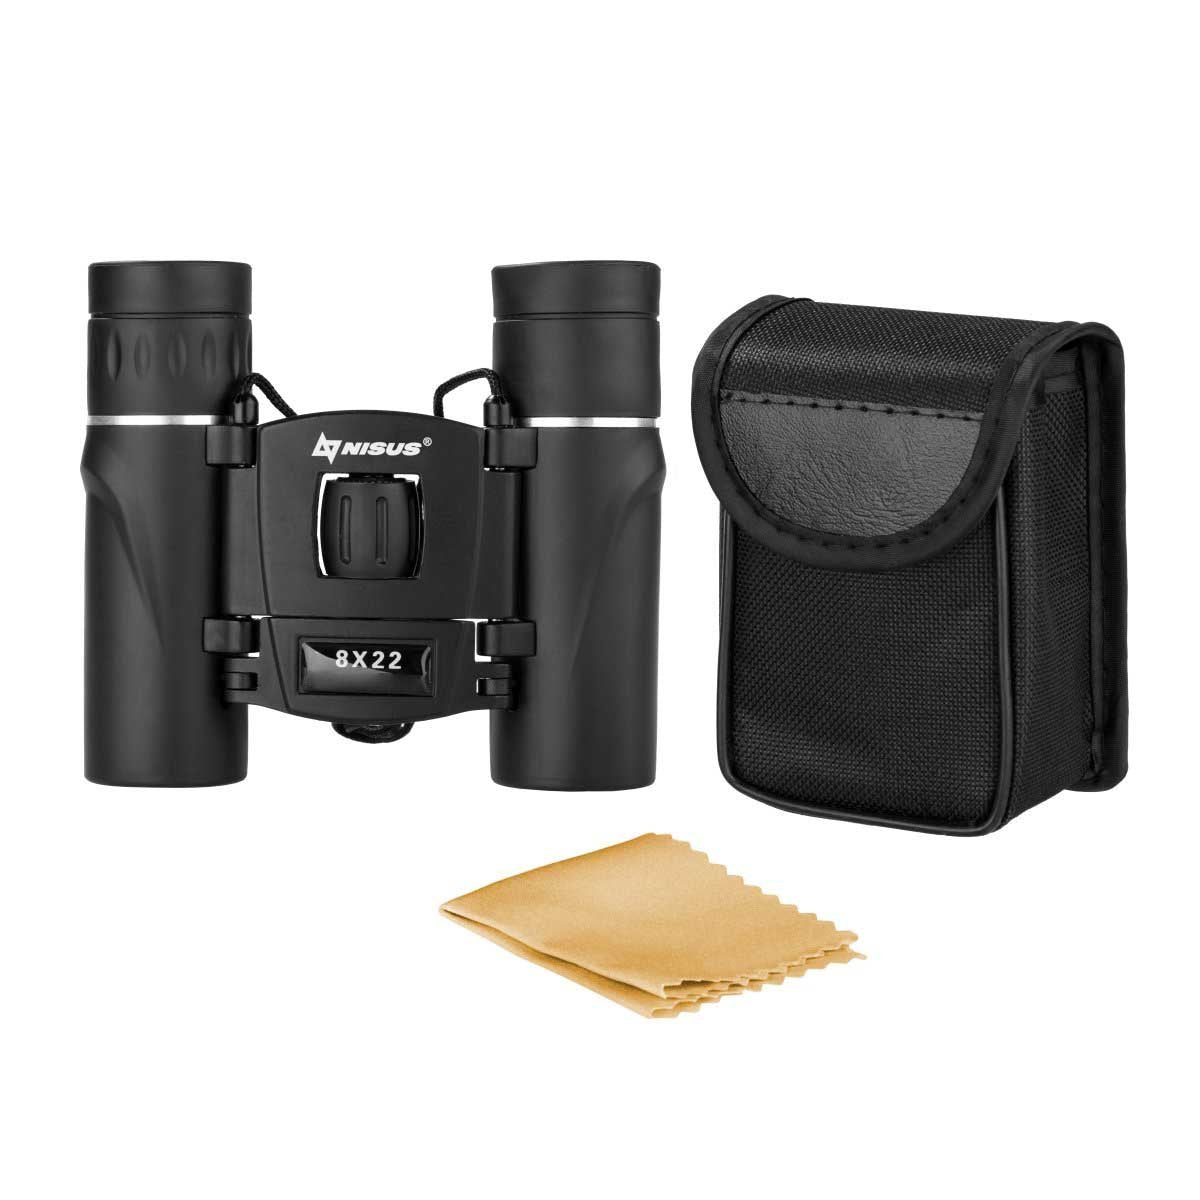 8x22 Compact Lightweight Binocular for Backpacking with a storage case